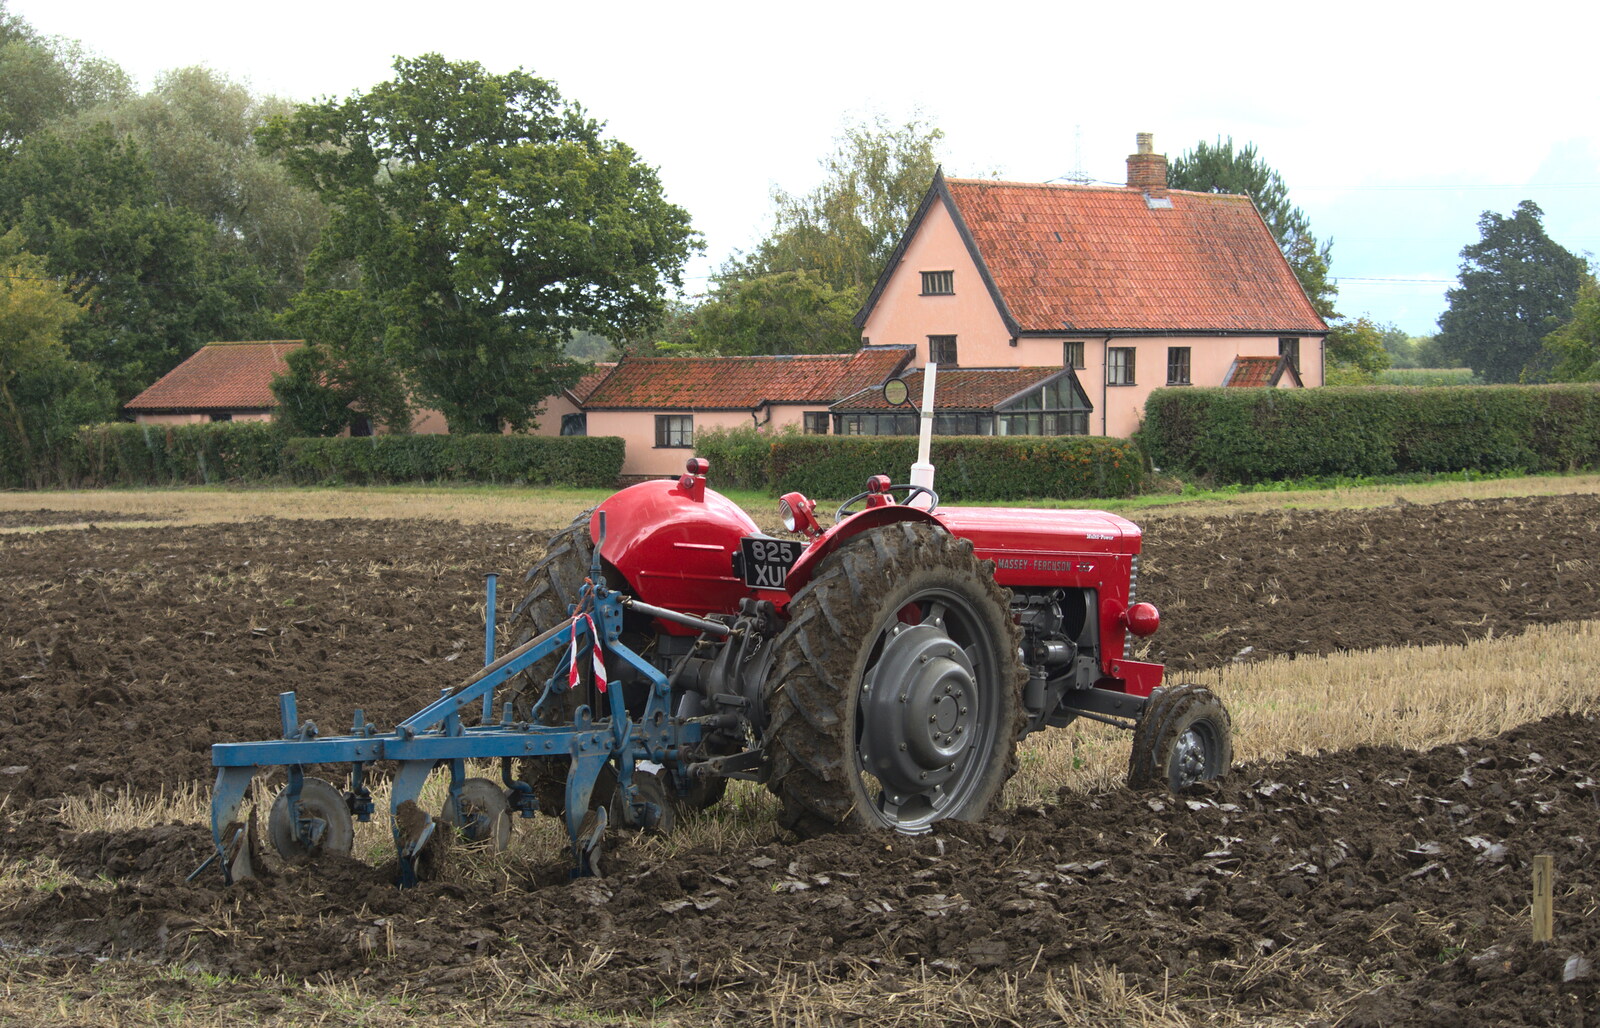 Tractor and plough in Thrandeston from Ploughing and Pizza, Thrandeston and Bury St. Edmunds, Suffolk - 17th September 2017